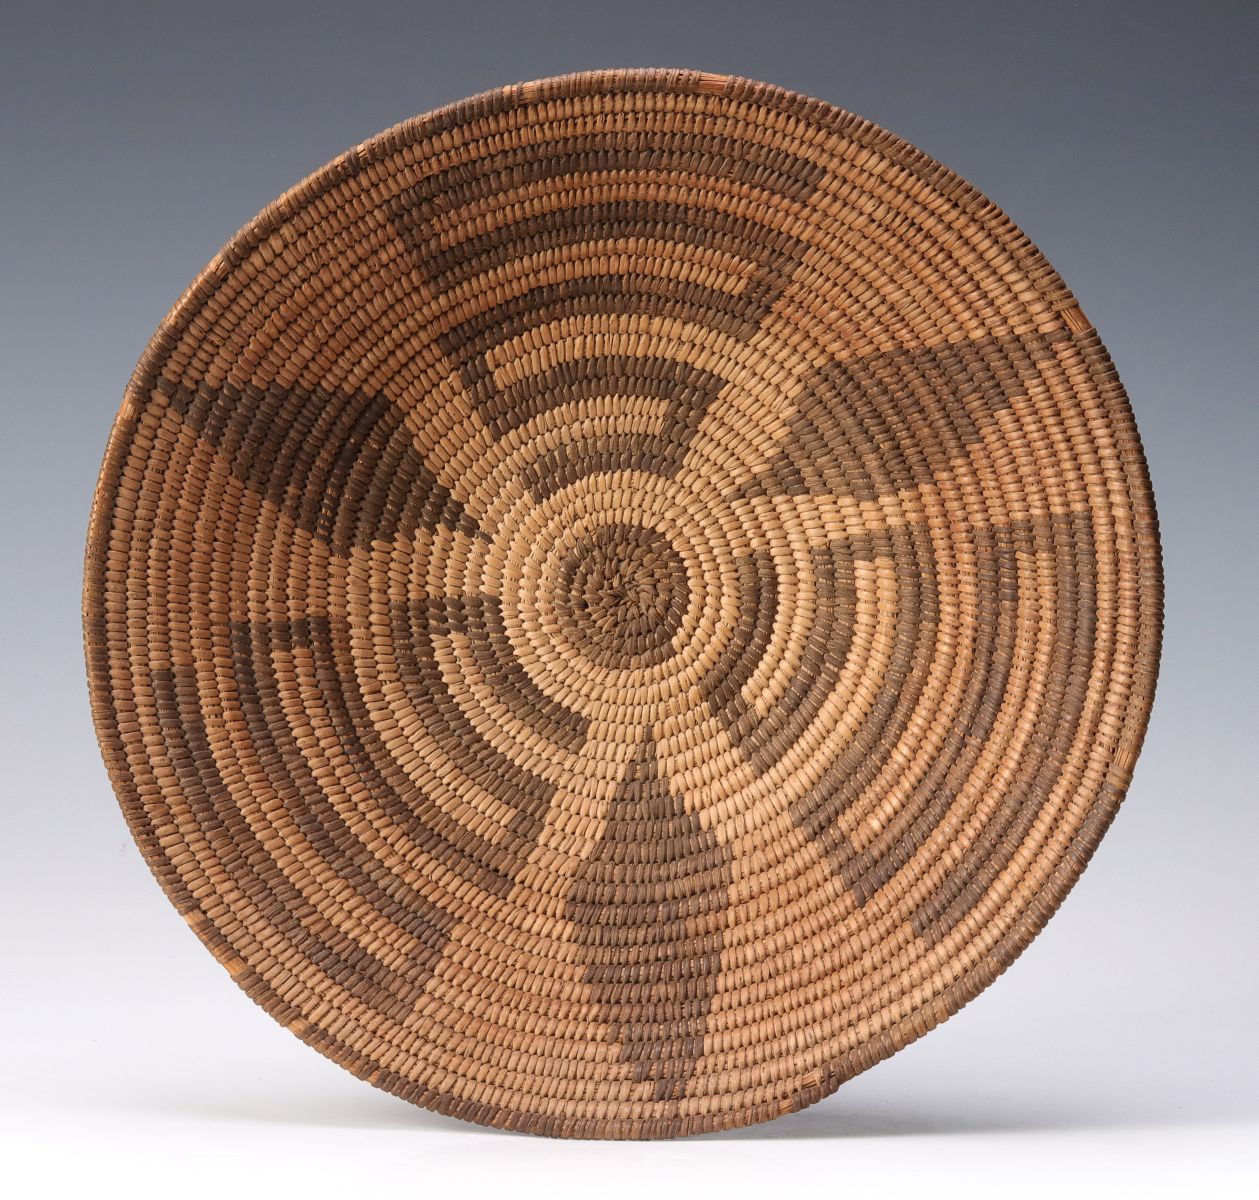 A PIMA INDIAN BASKETRY TRAY